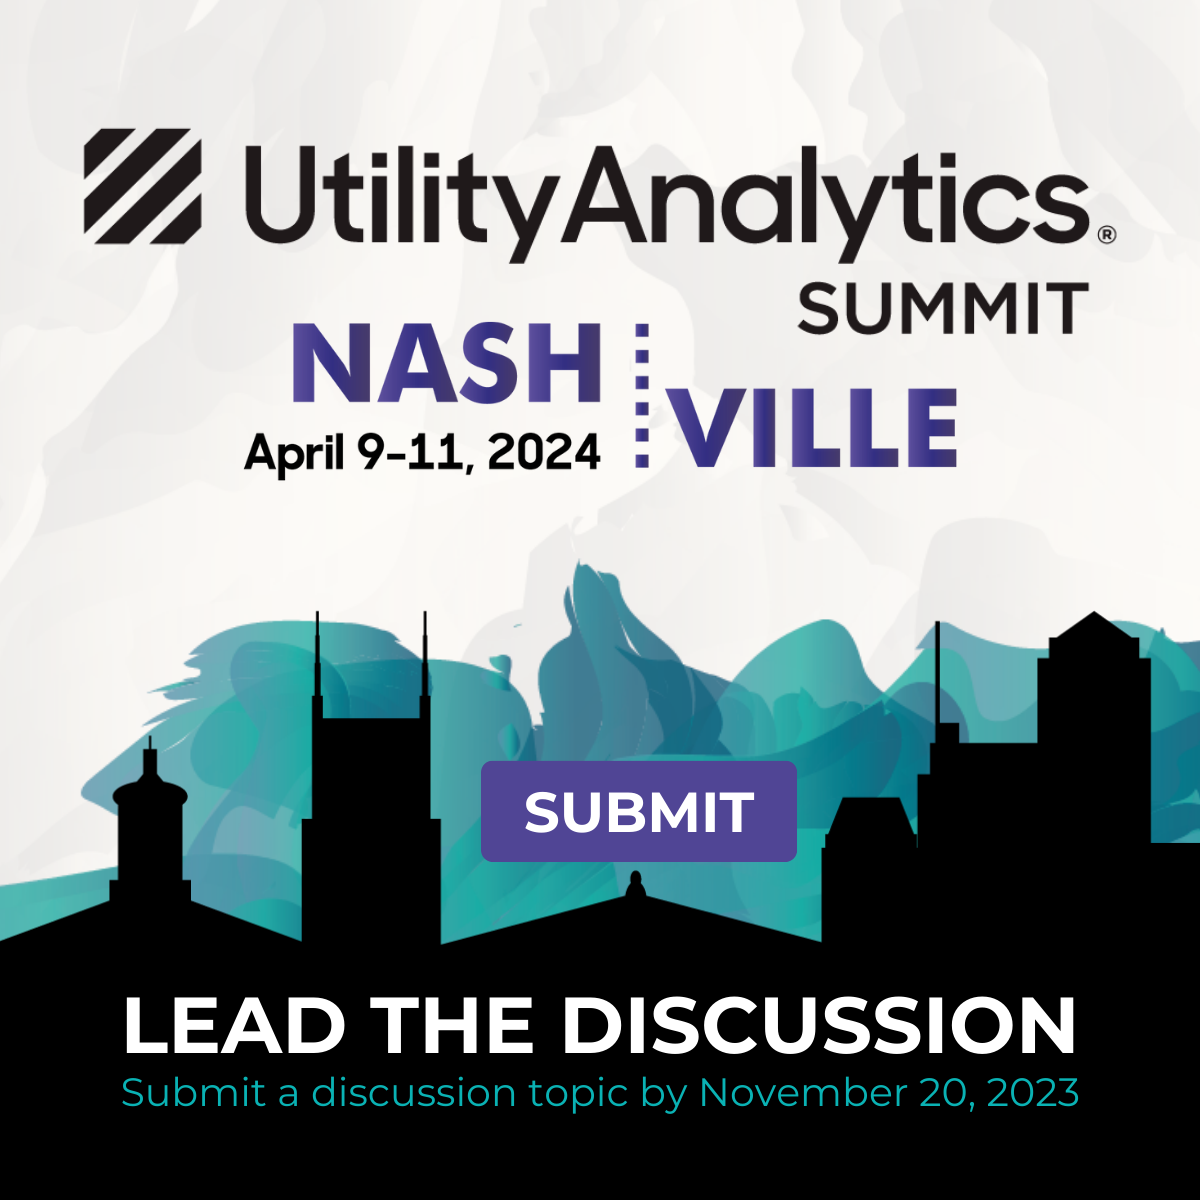 DEADLINE to submit Discussion Topics for Utility Analytics Summit 2024